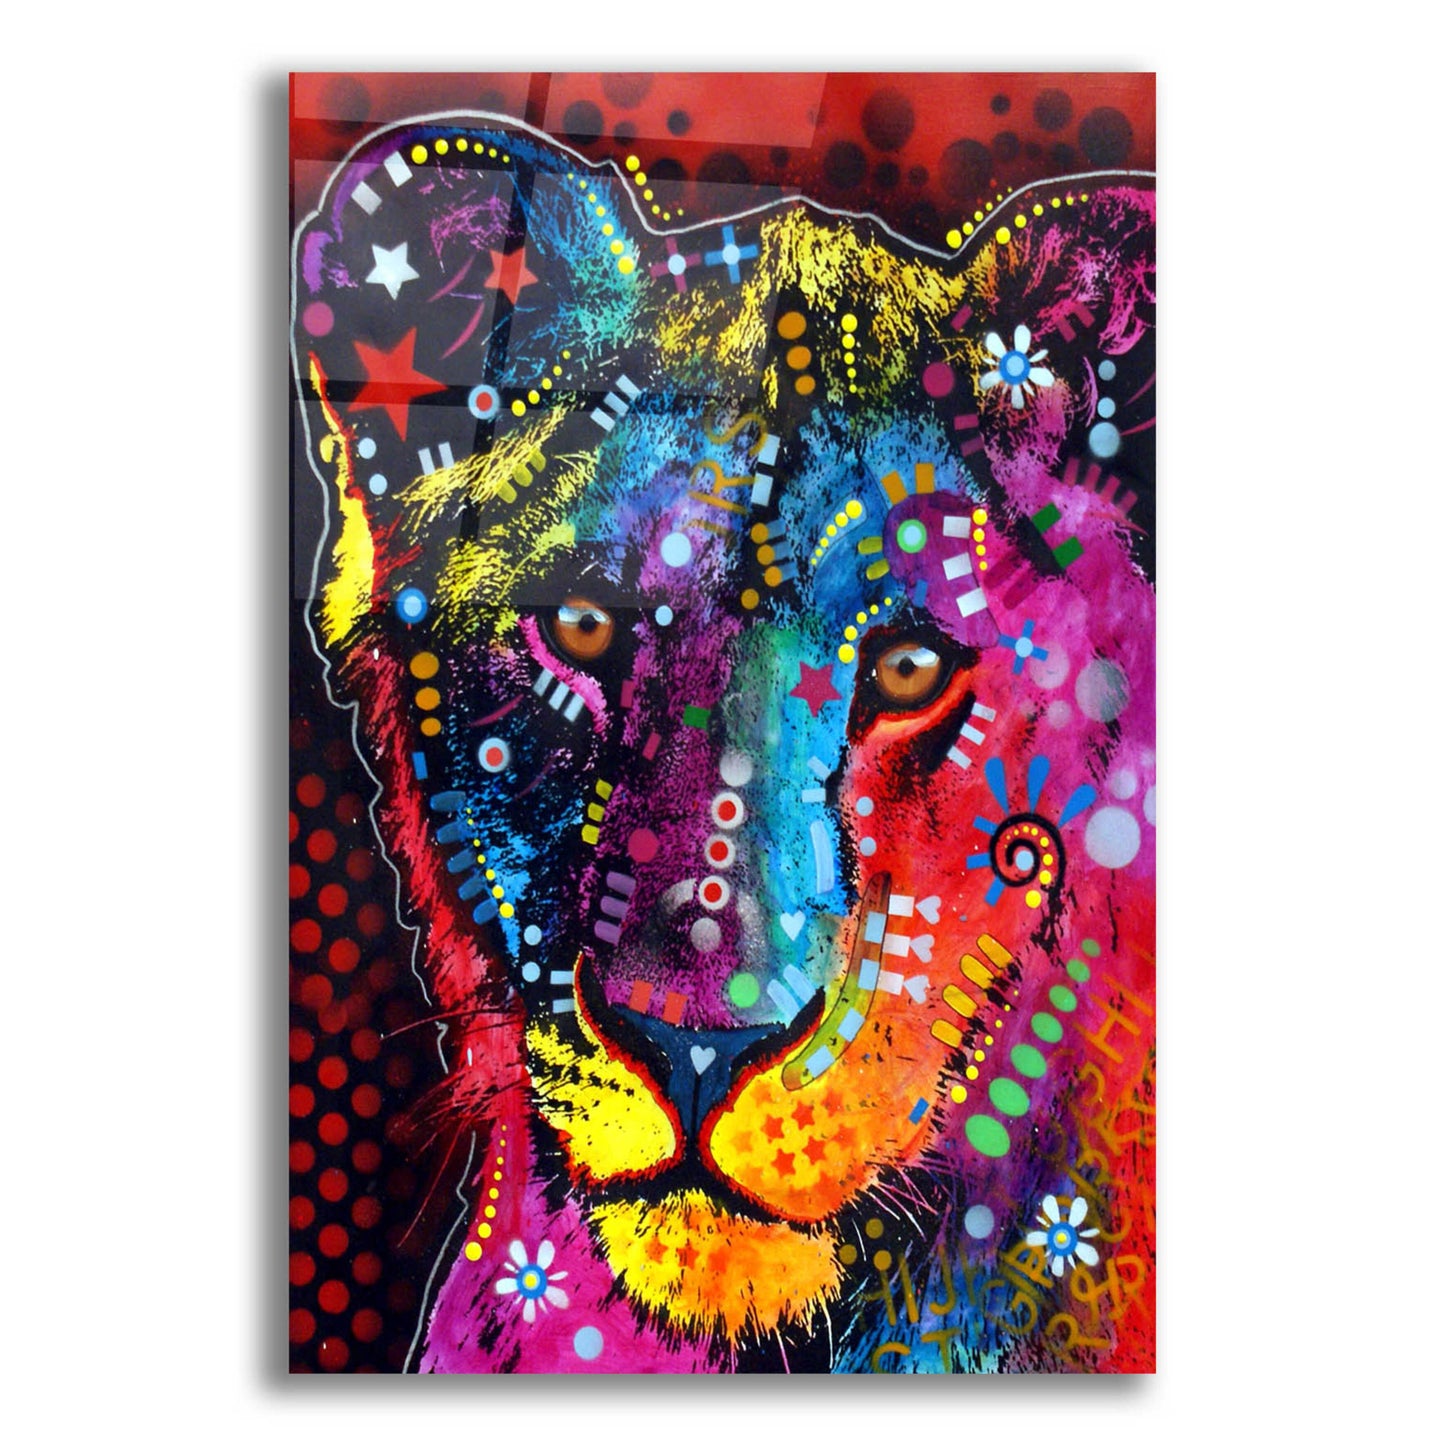 Epic Art 'Young Lion' by Dean Russo, Acrylic Glass Wall Art,12x16